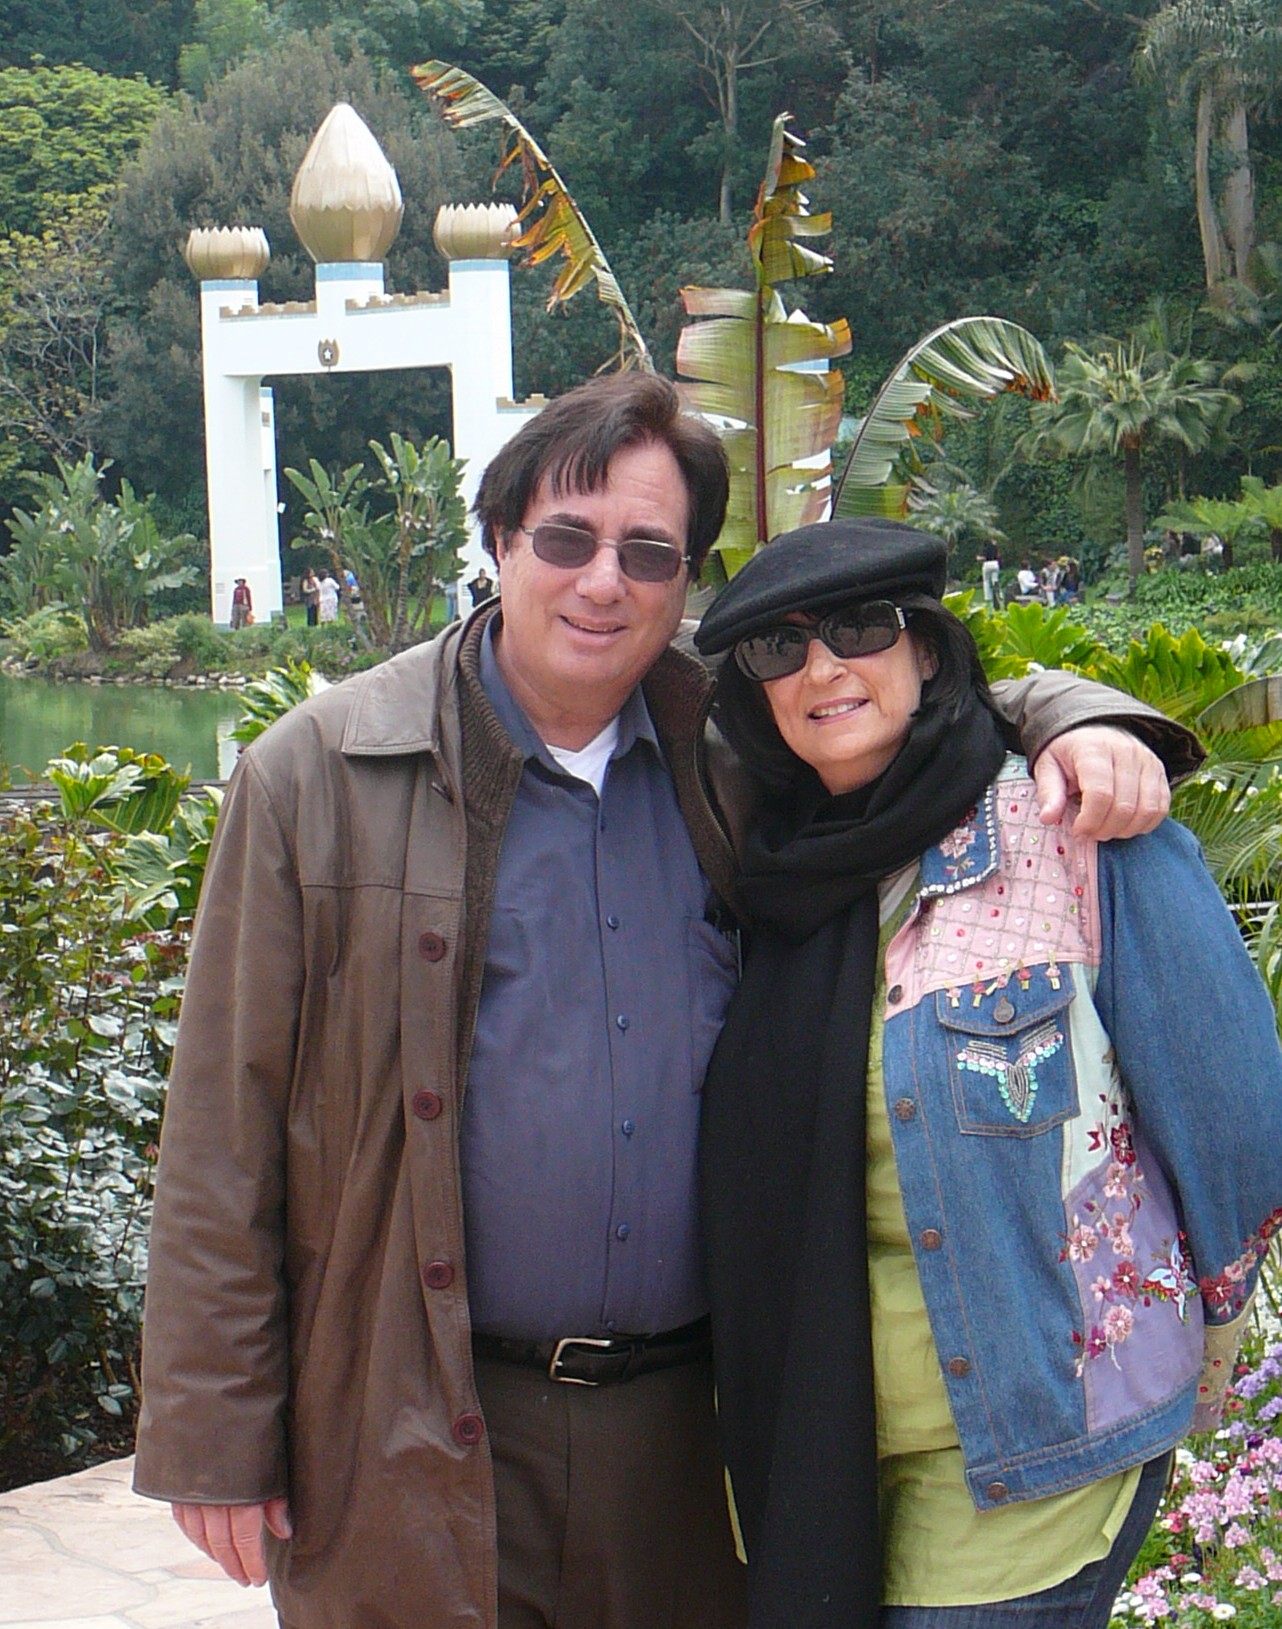 Paul Davids and Hollace Davids (2009) at the Self-Realization Fellowship Lake Shrine, Los Angeles, the day after presenting 